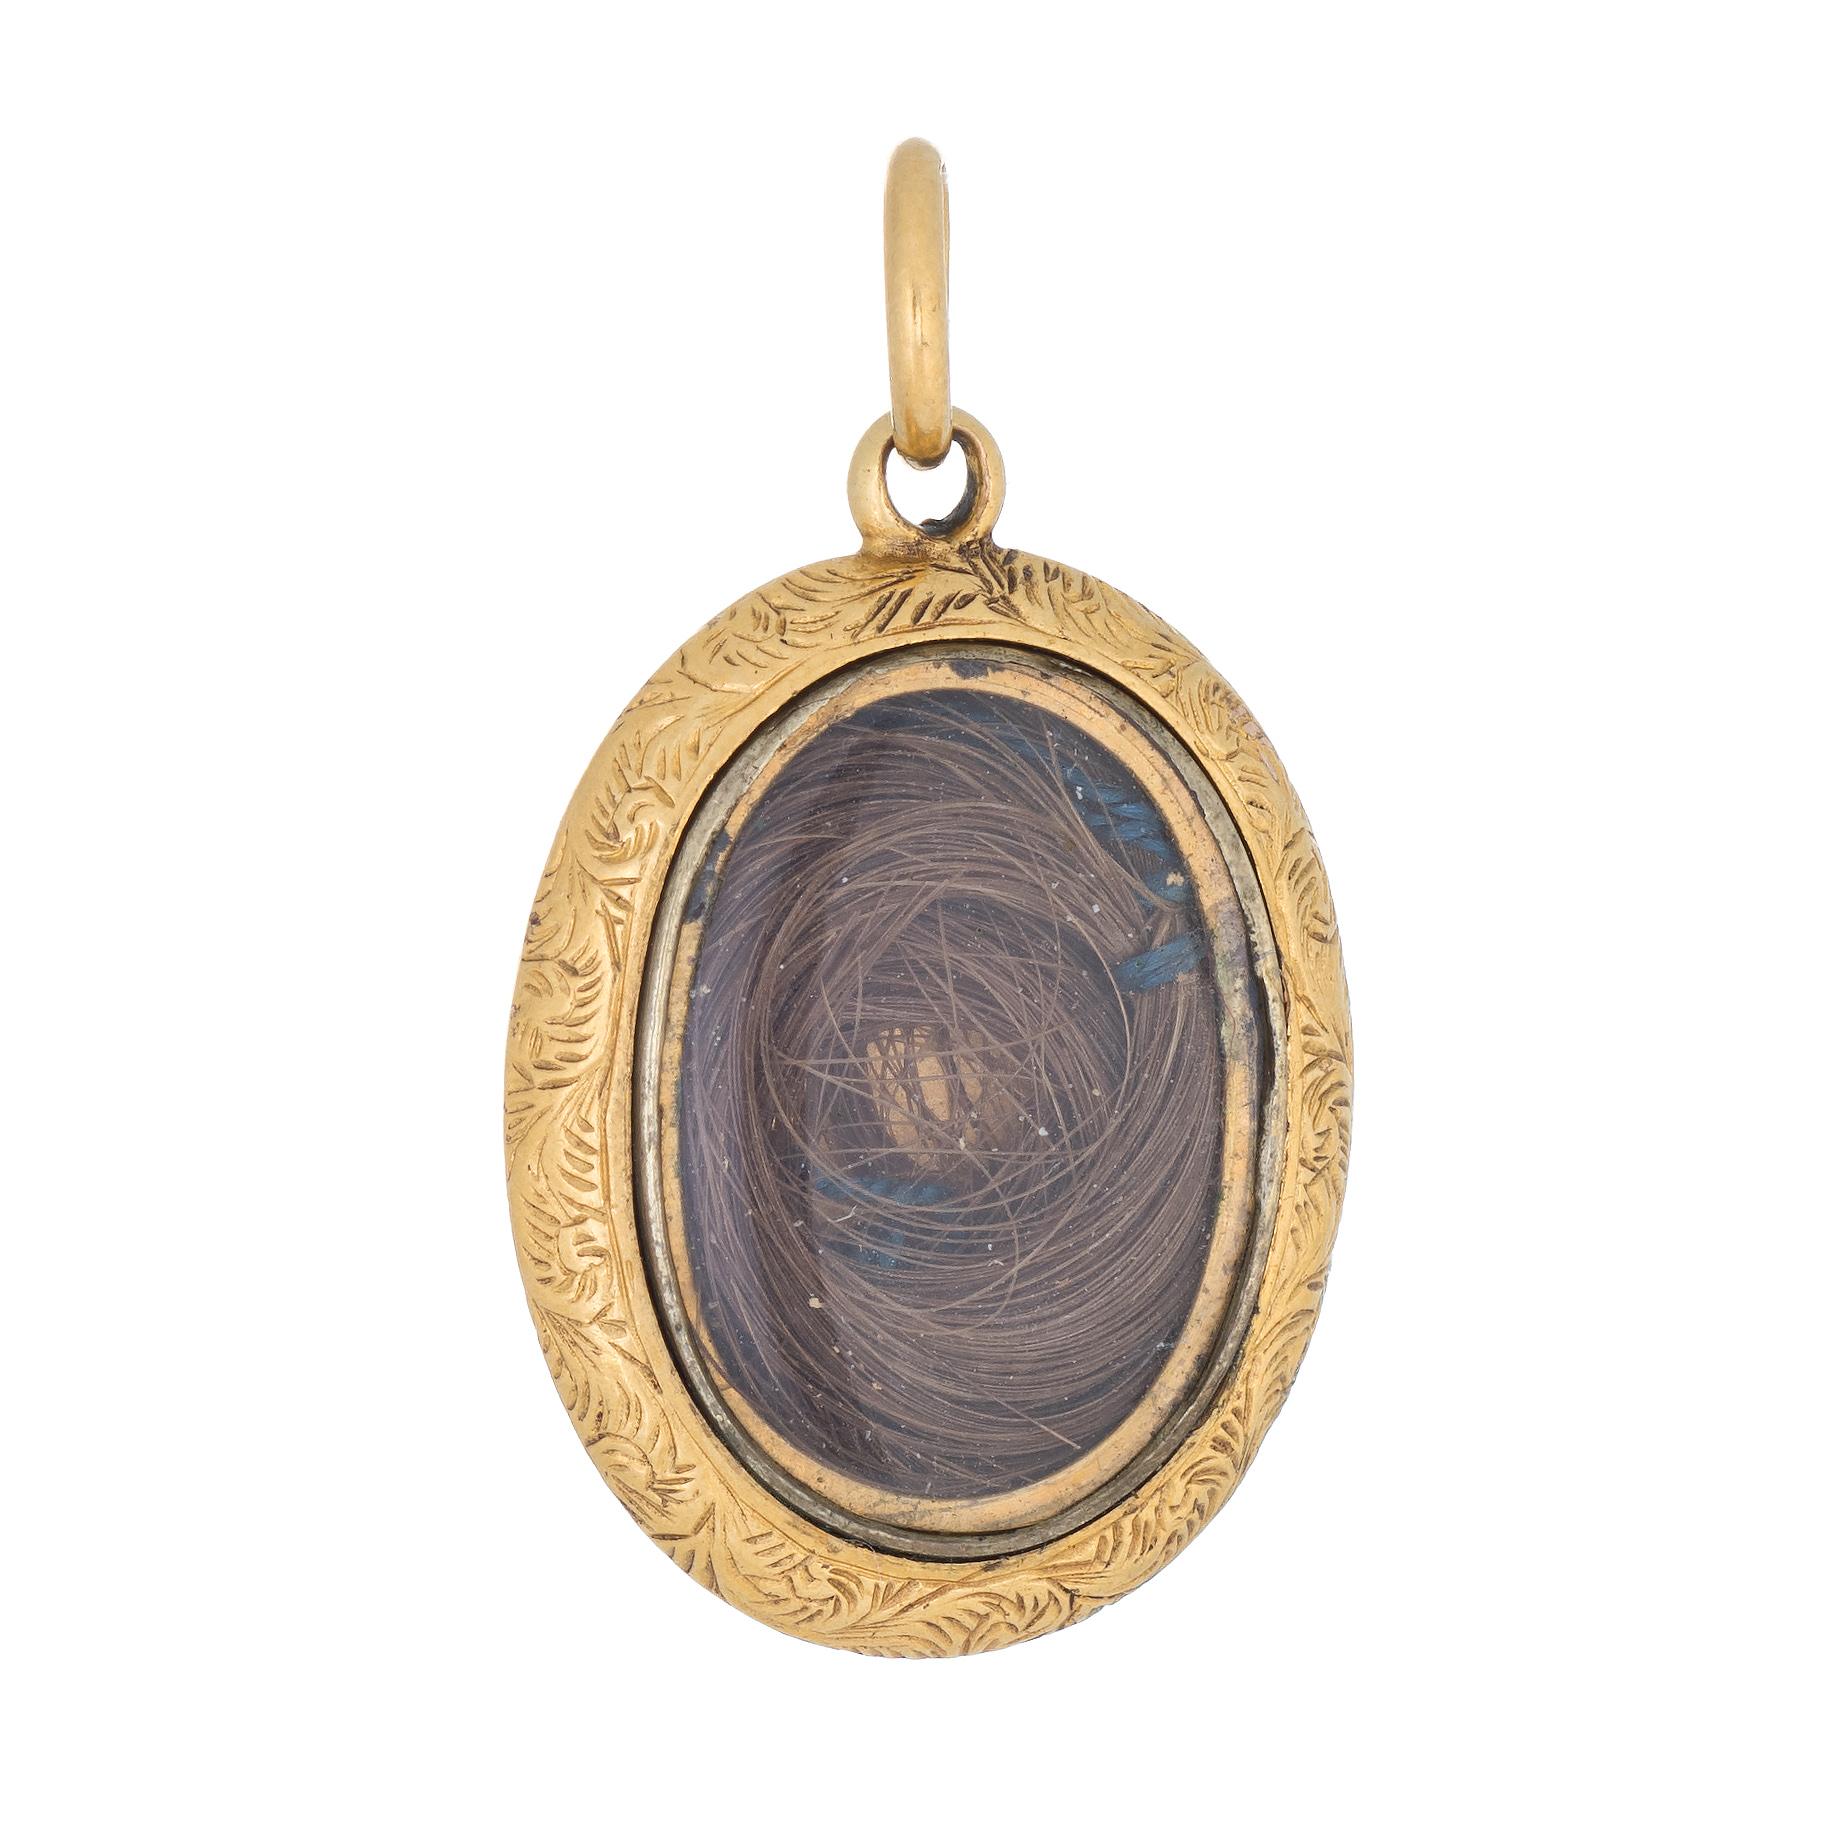 Finely detailed Victorian pendant (circa 1880s to 1900s) crafted in 18 karat yellow gold. 

The oval pendant is fitted with a lock of hair behind a protective plastic case (does not open). The reverse side features an intricate decorative foliate